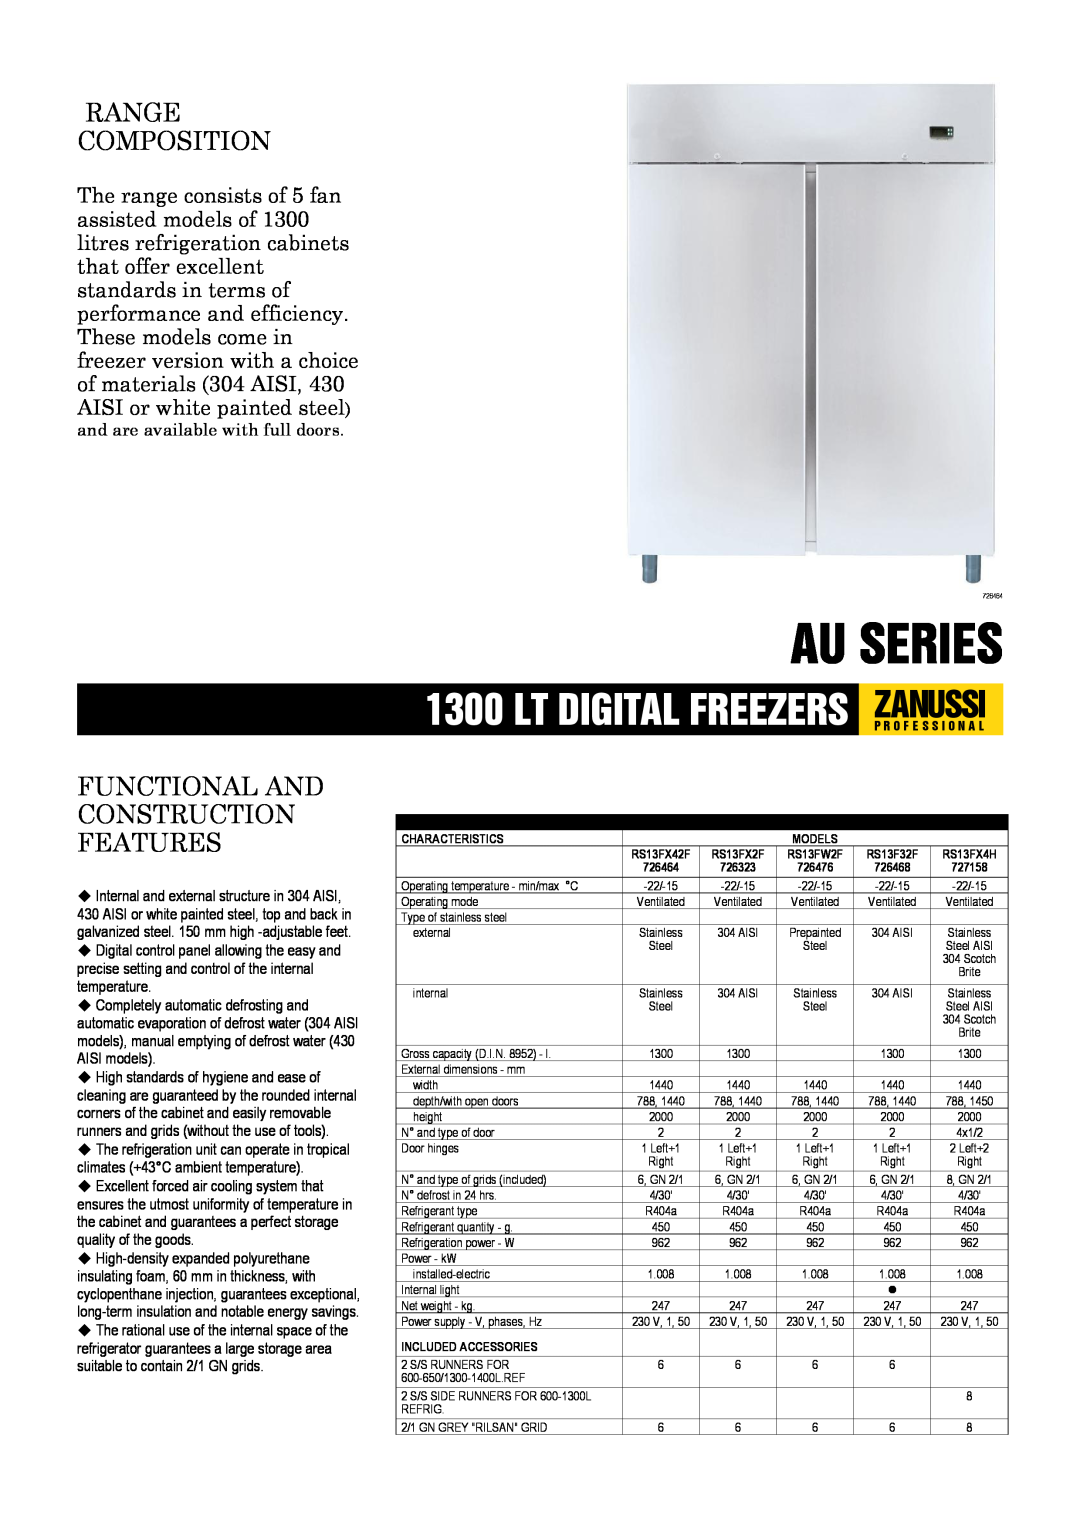 Zanussi RS13FX2F, RS13FX42F, RS13F32F, 726476 dimensions Au Series, Range Composition, Functional And Construction Features 